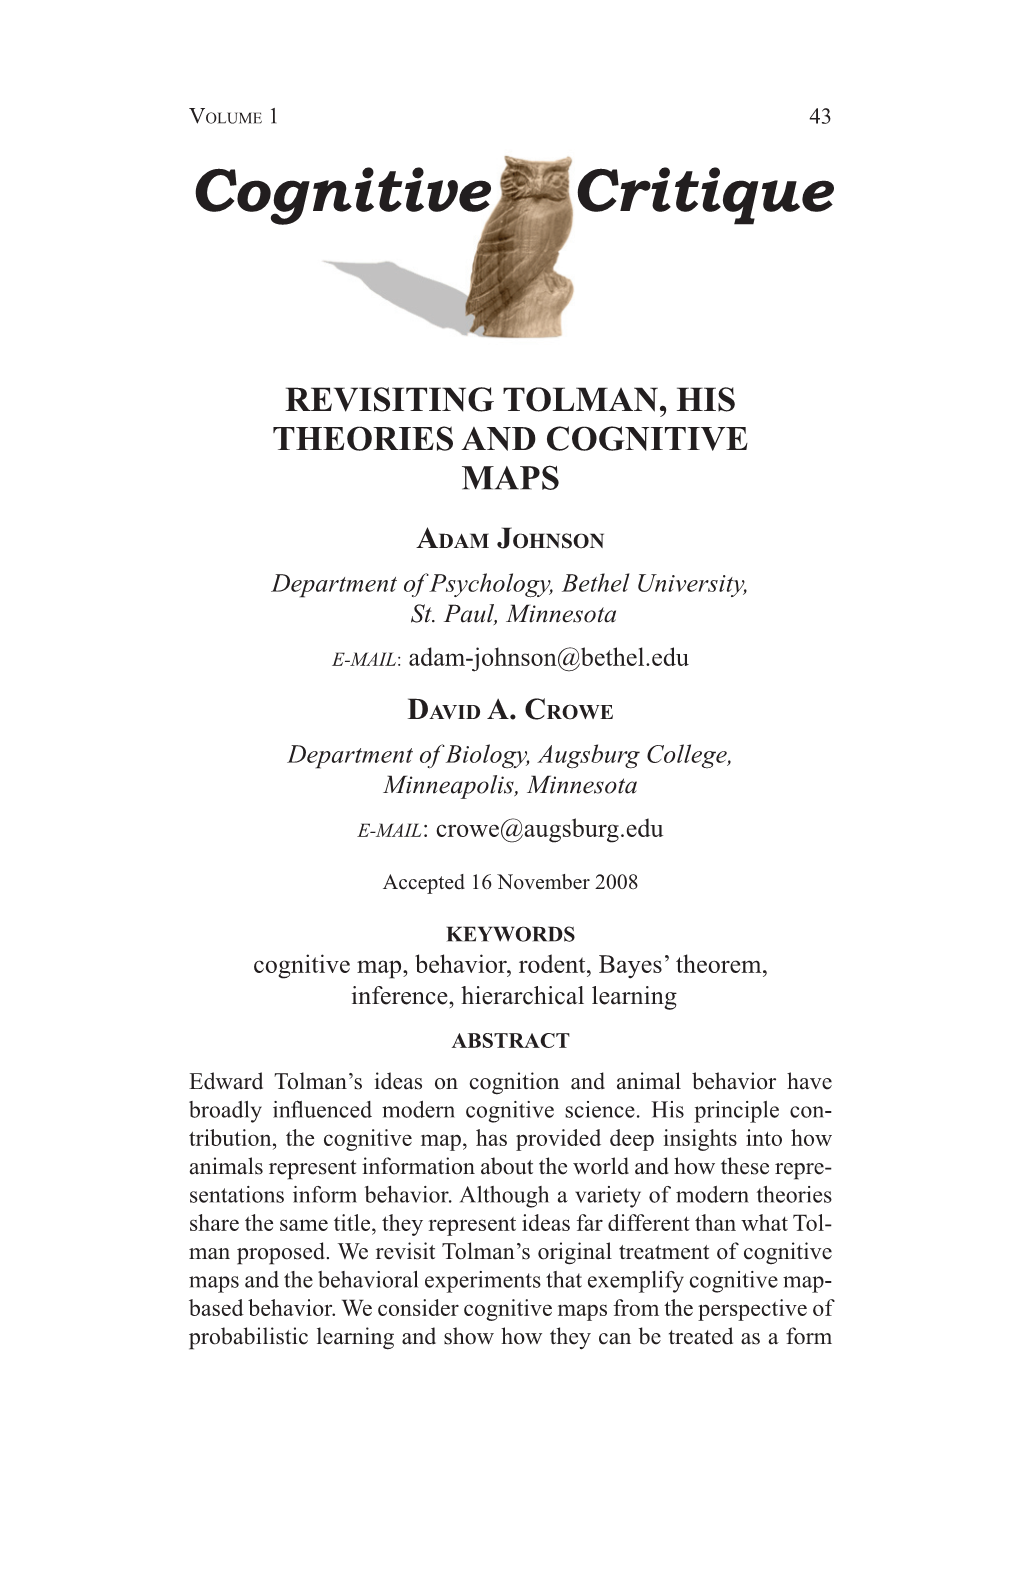 Revisiting Tolman, His Theories and Cognitive Maps